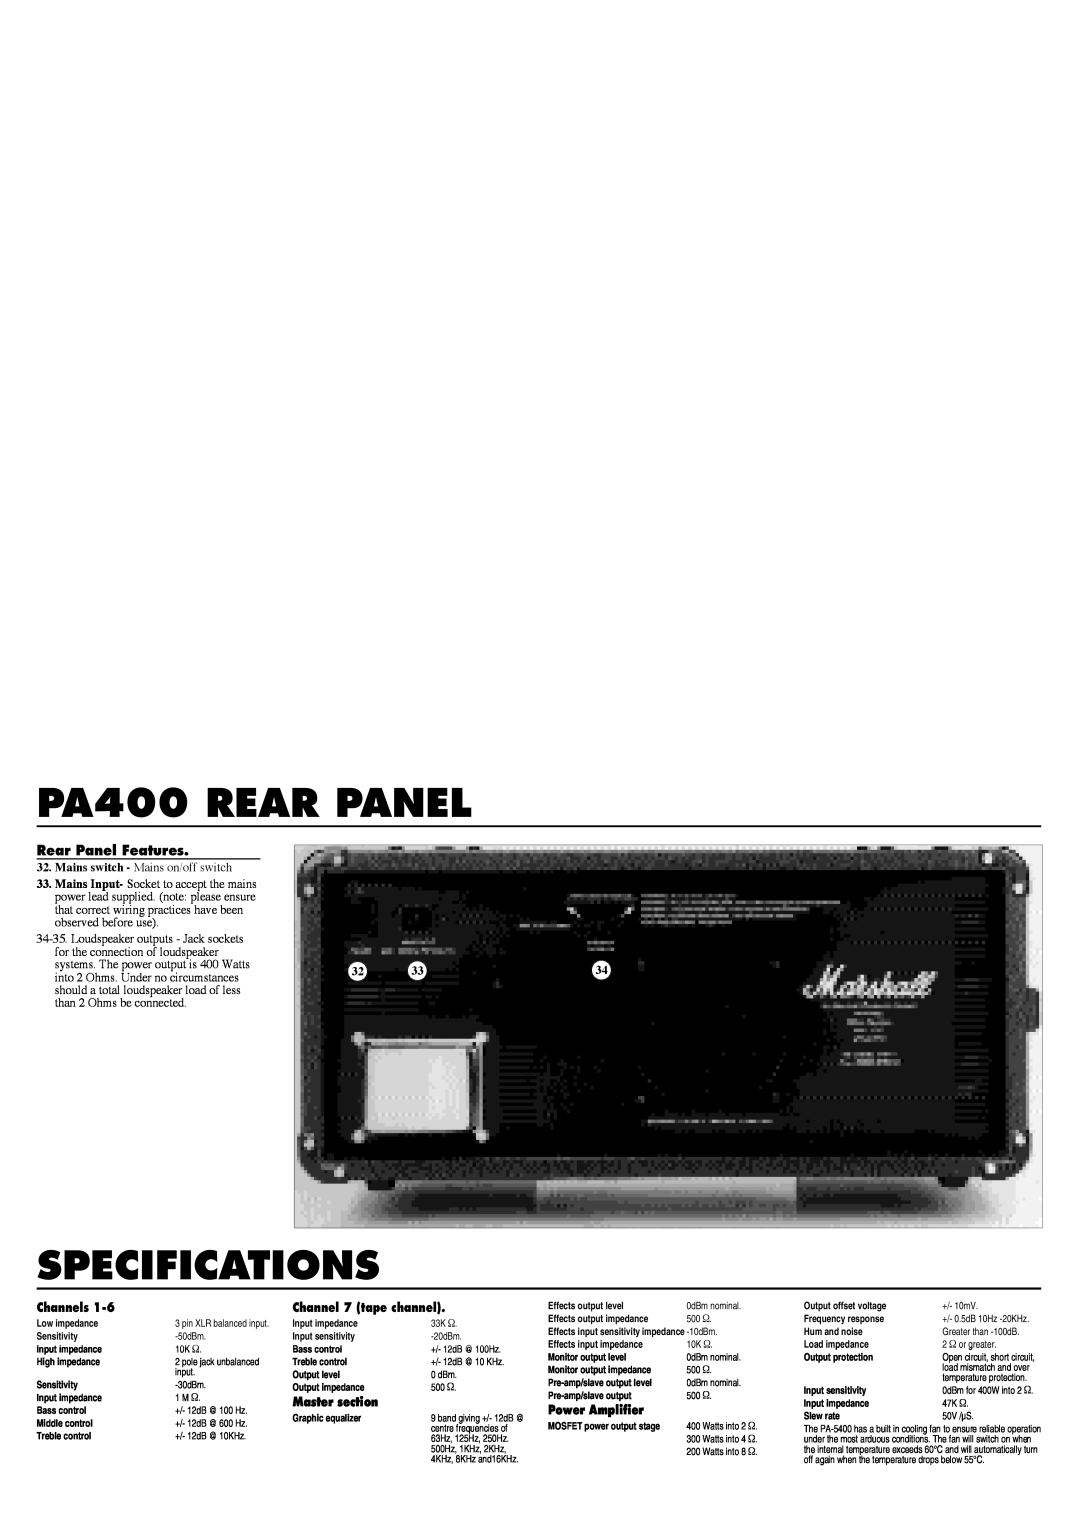 Marshall Amplification specifications PA400 REAR PANEL, Specifications, Rear Panel Features 